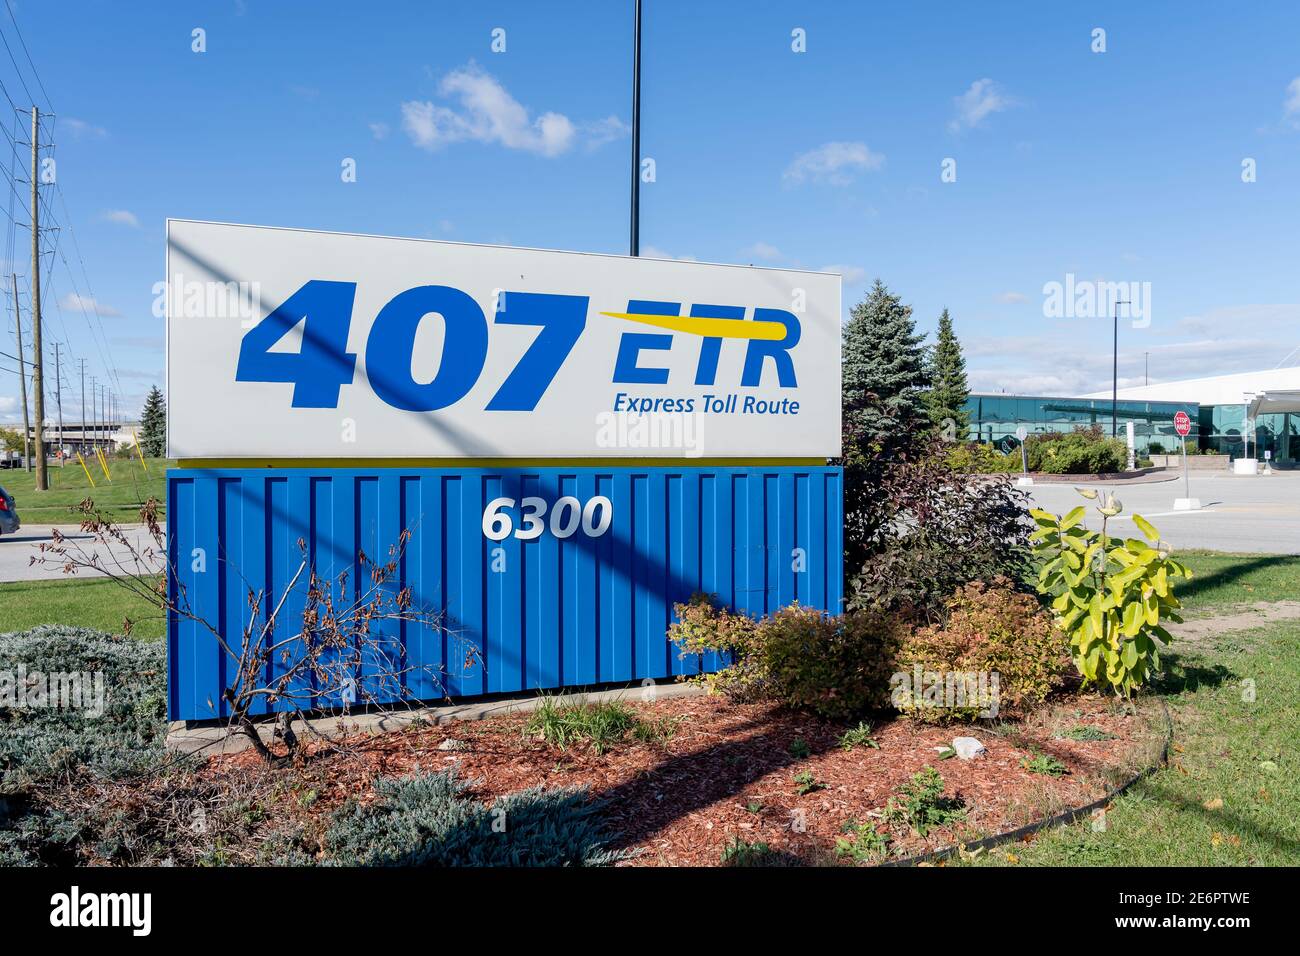 Woodbridge, Ontario, Canada - October 8, 2020: 407 ETR sign at 407 ETR Concession Company Limited Corporate office in Woodbridge, Ontario, Canada. Stock Photo